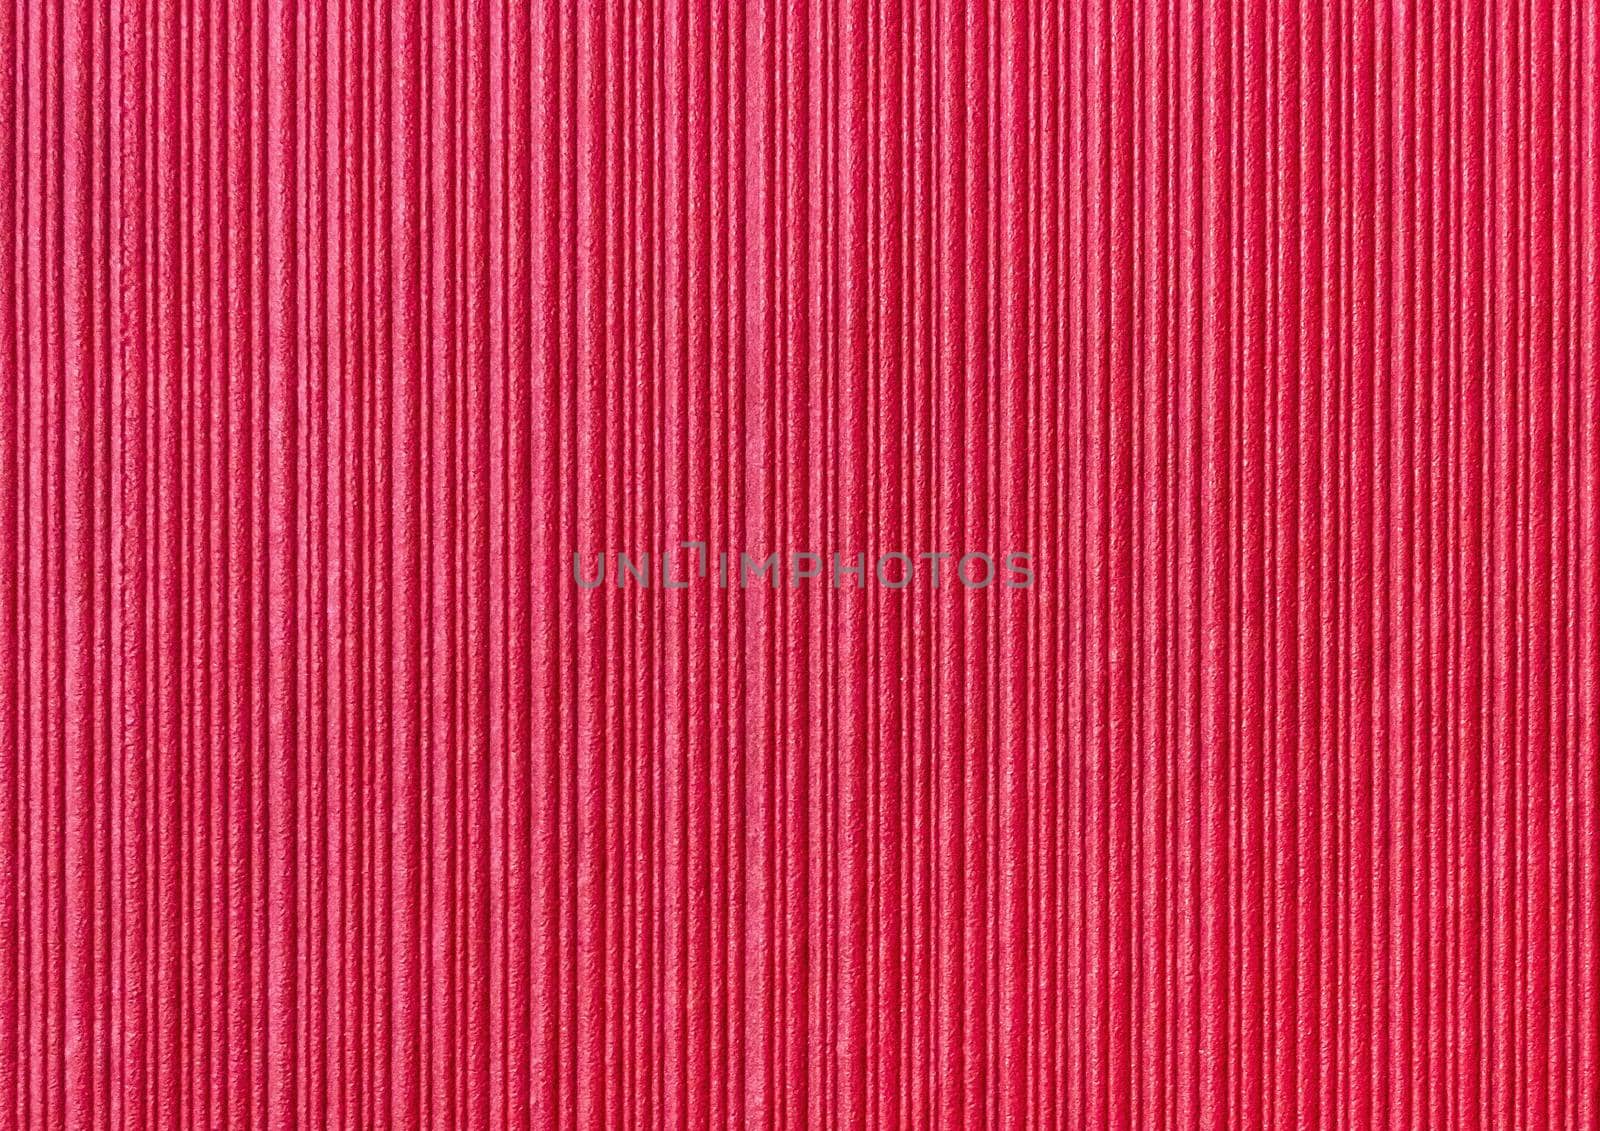 Red abstract striped pattern wallpaper background, paper texture with vertical lines by AYDO8